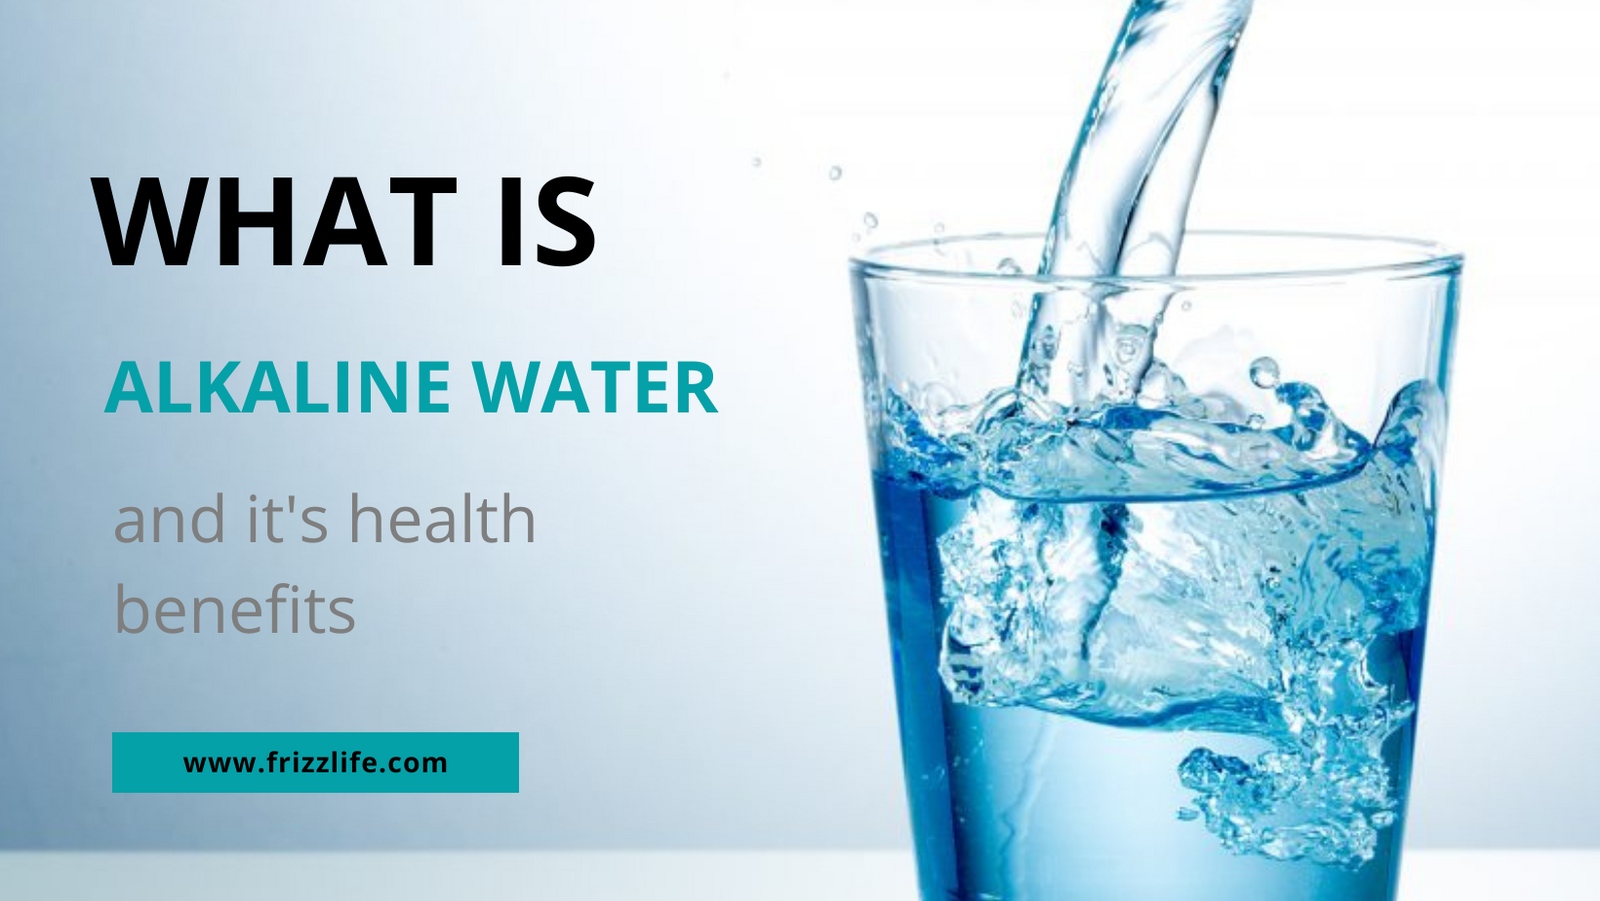 What is alkaline water and it's health benefits